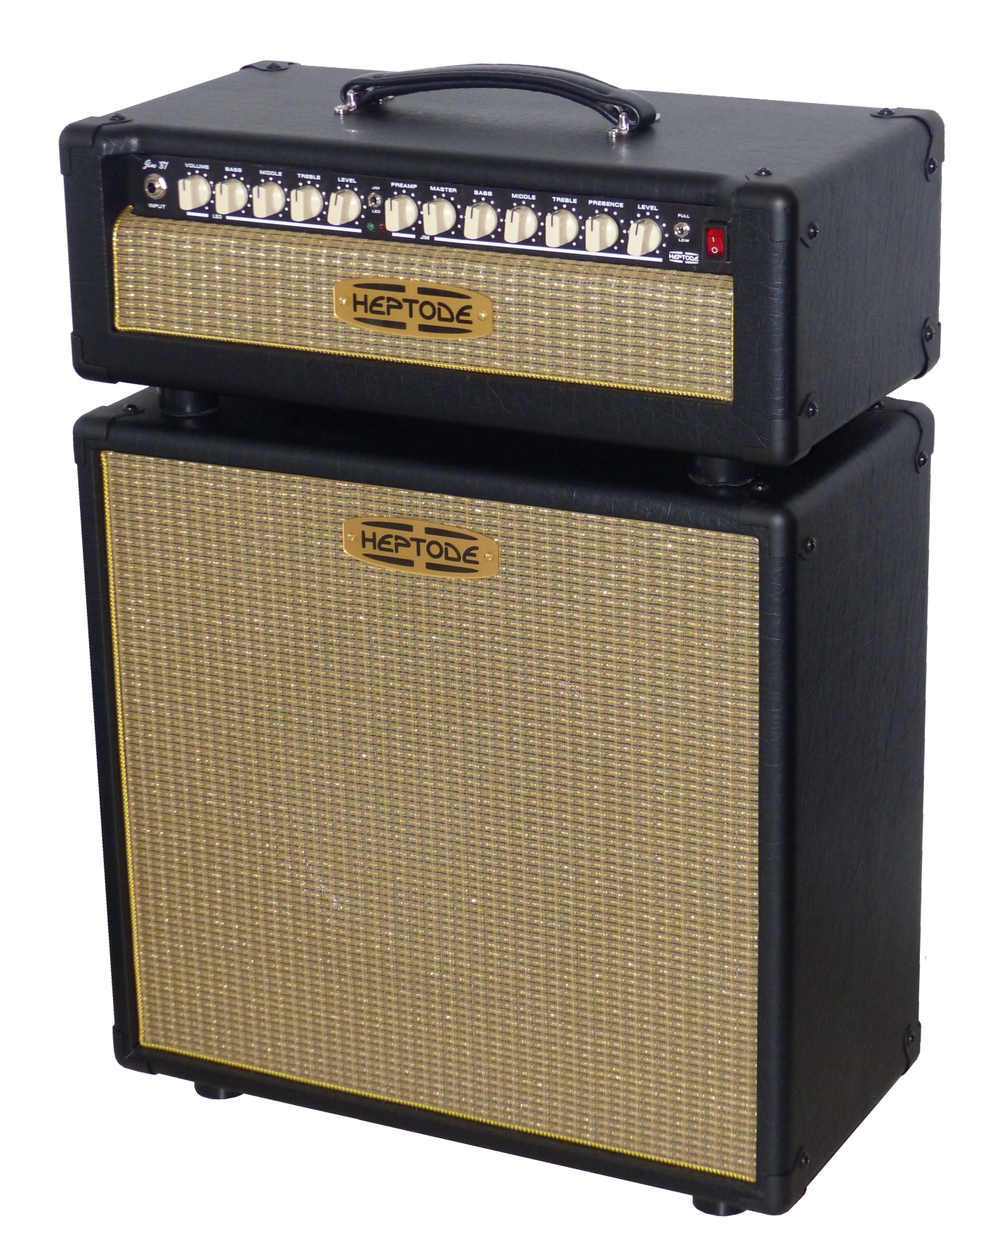 Heptode Jim'81 head and 1x12 cabinet